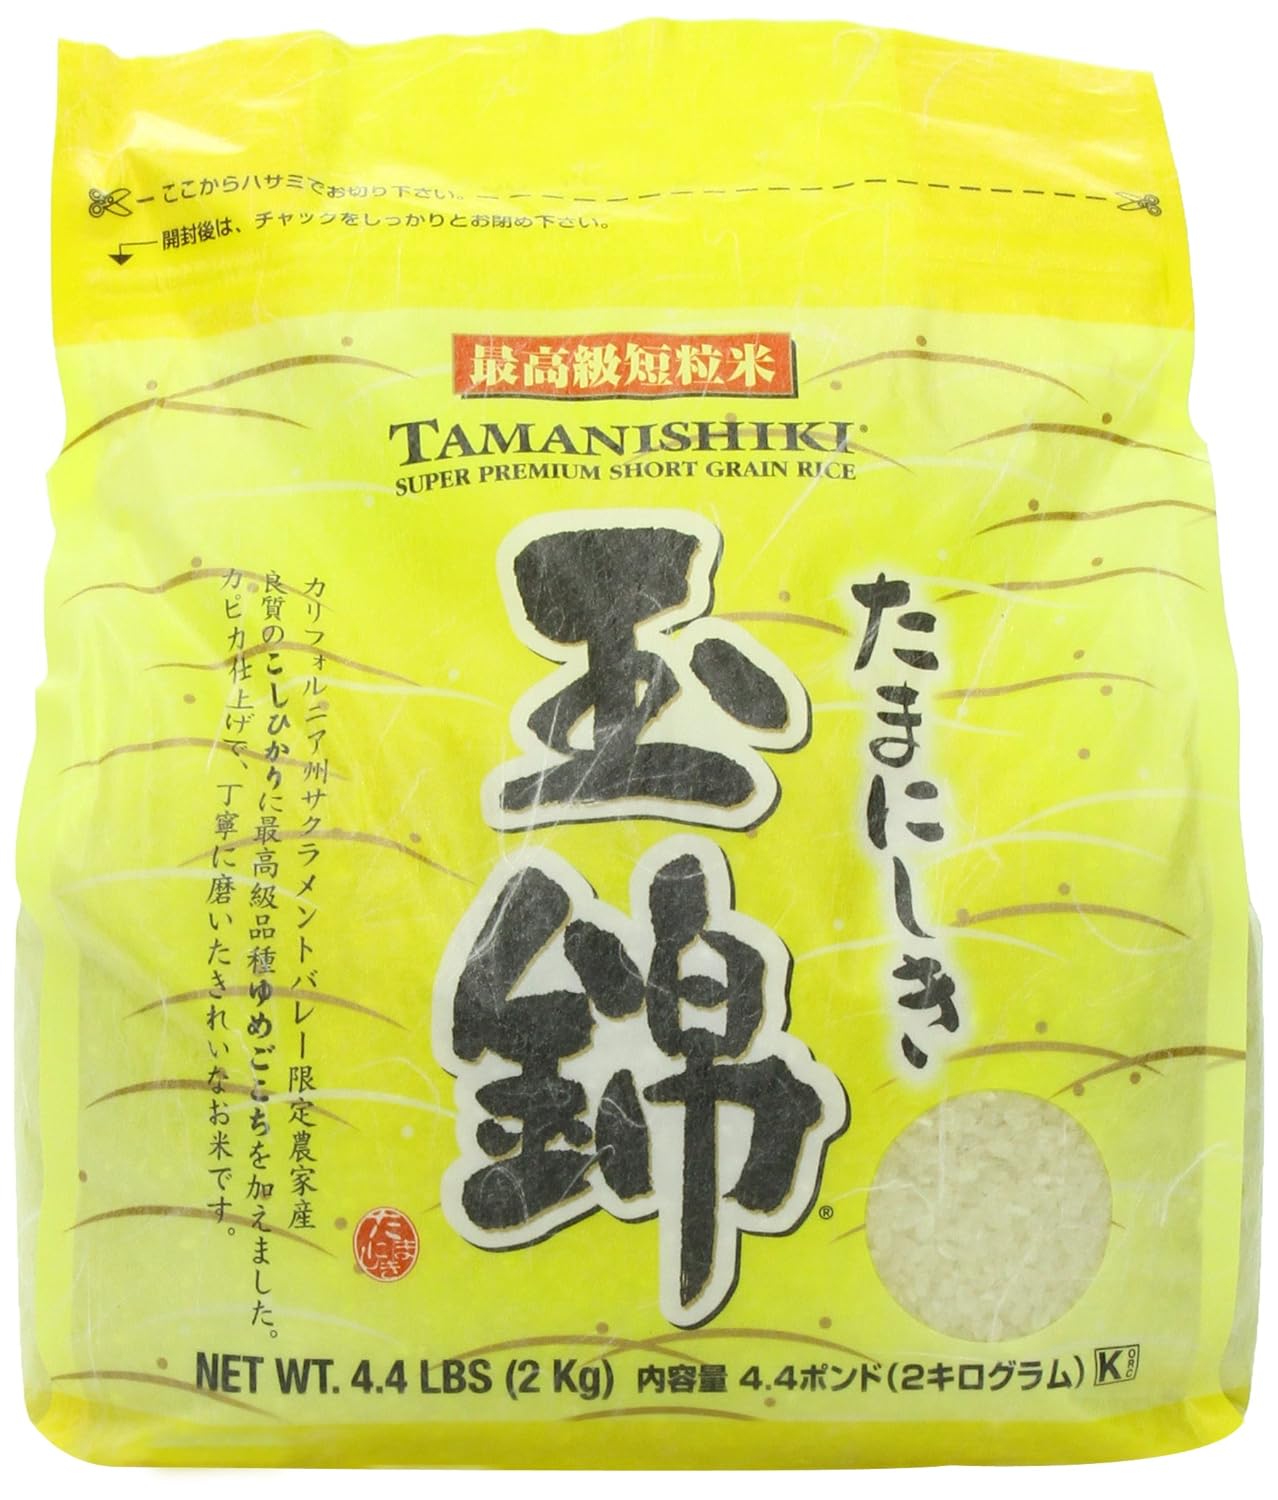 The taste of this rice is delicious! Although it is a little pricey, it is well worth it. I was born and raised in Japan so I am very picky about the taste and texture of rice. I found it in a grocery store but lately, I was unable to find it. I was very happy to see that I can get it via Amazon.